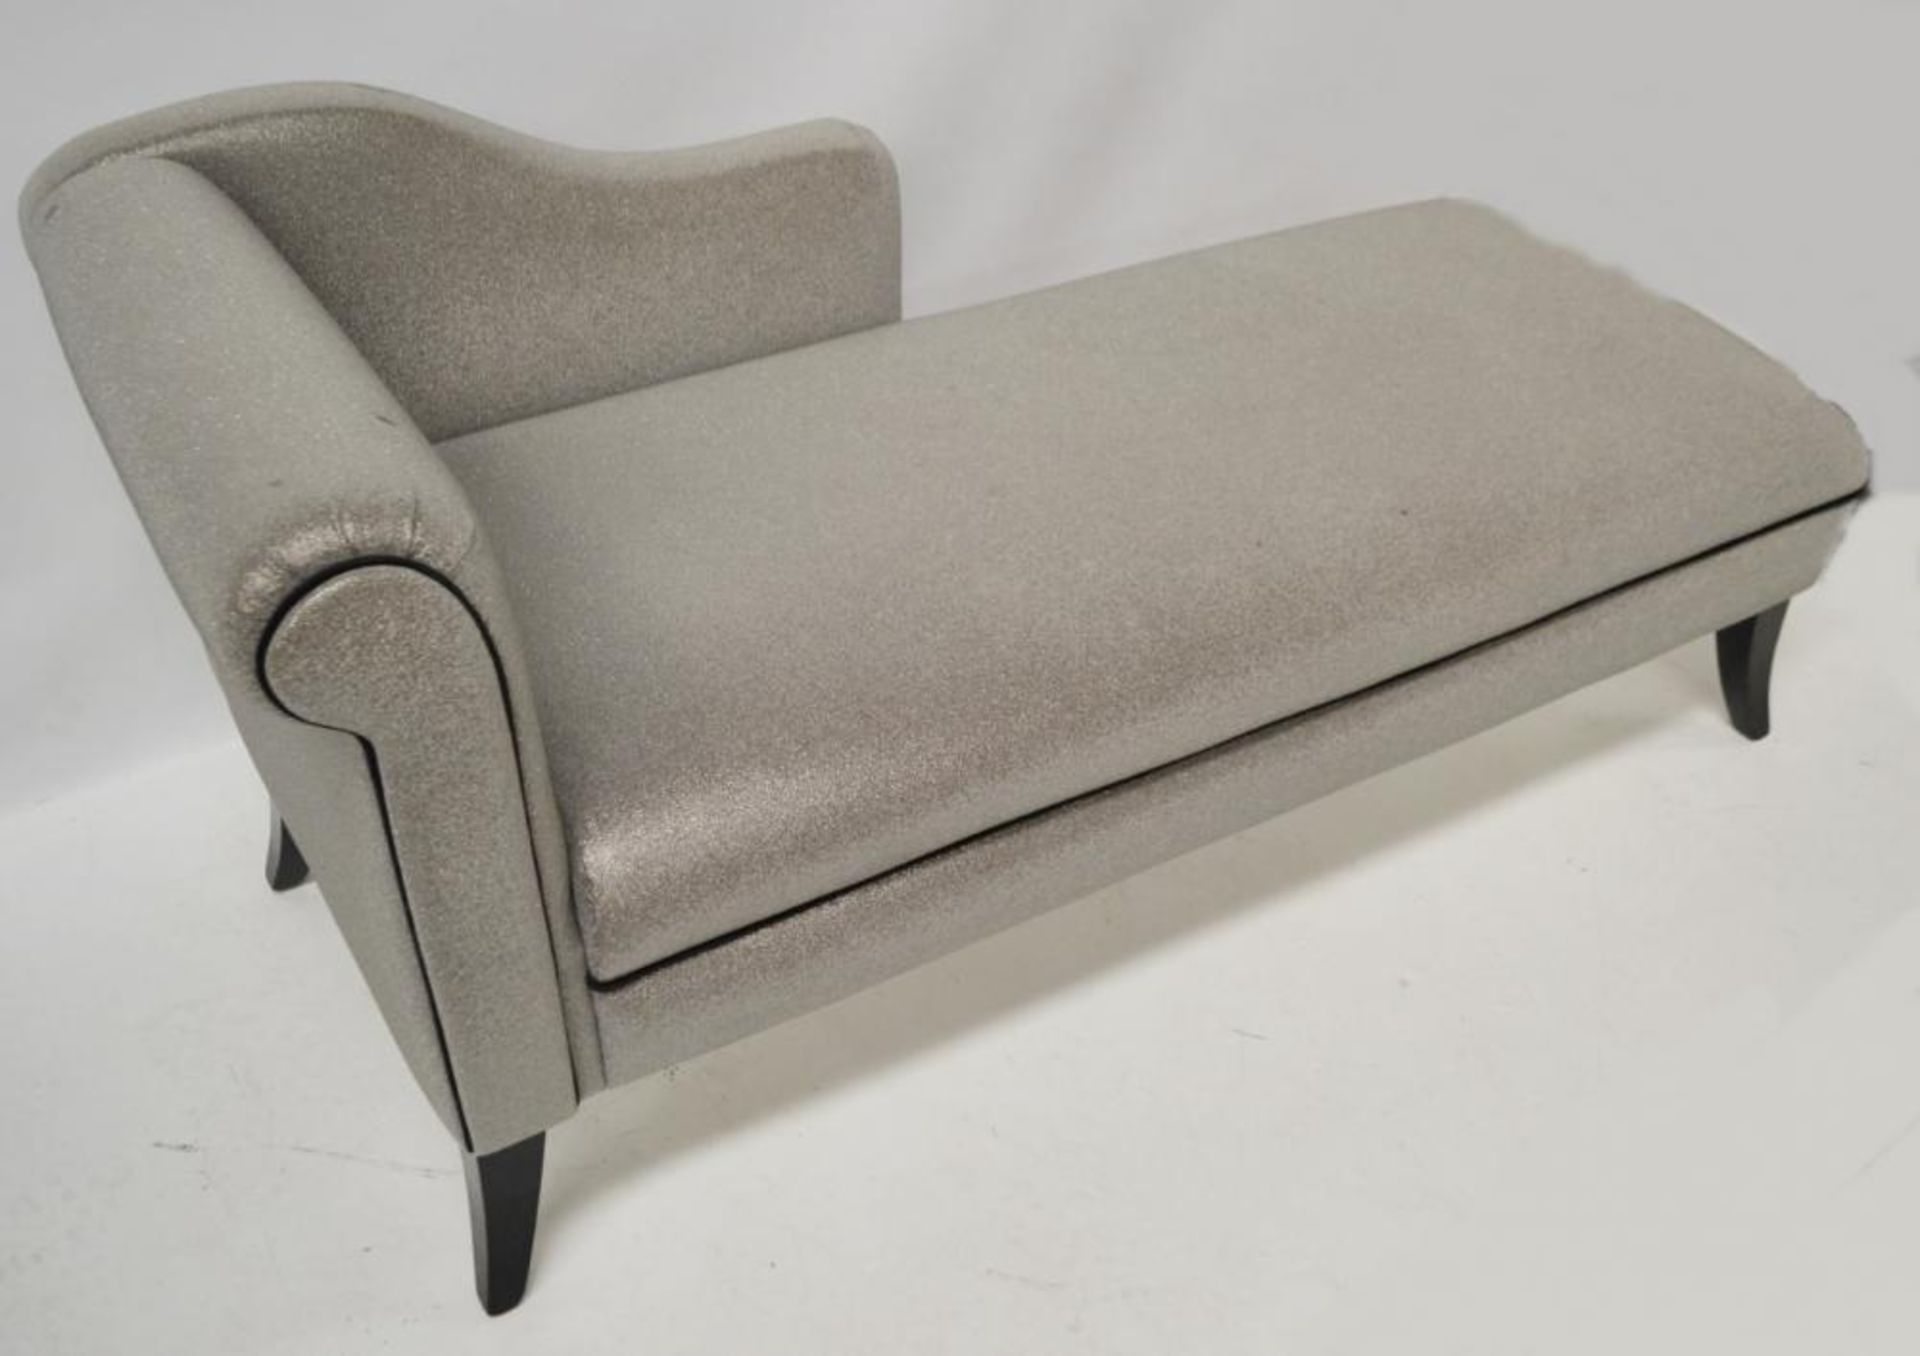 1 x Chaise Lounge Chair Finished In Silver Glitter - Ref: BLT376 - CL380 - NO VAT ON THE HAMMER - - Image 3 of 8